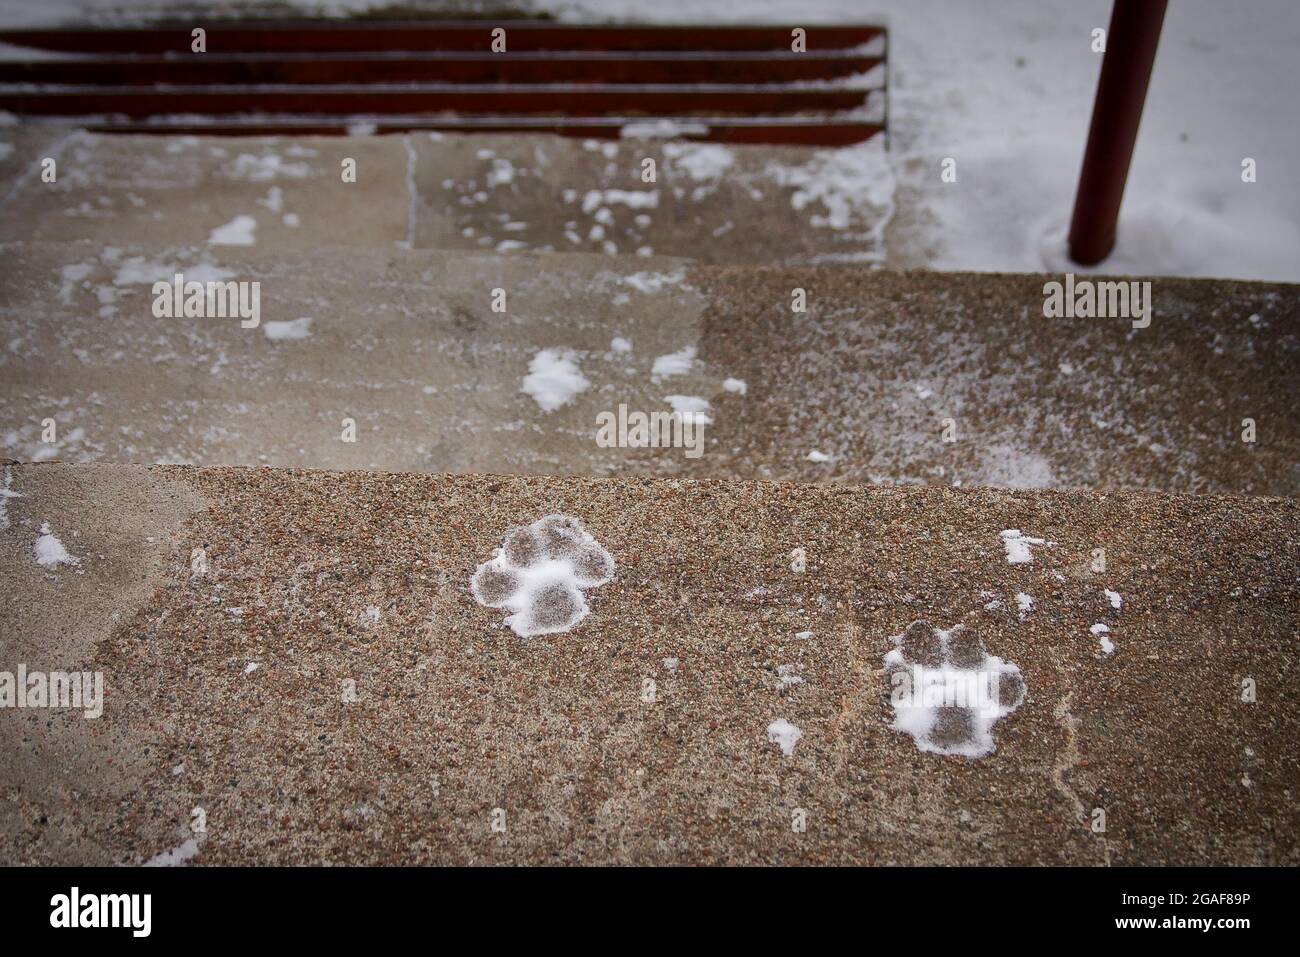 Frozen footprints of a dog on stairs. Stock Photo